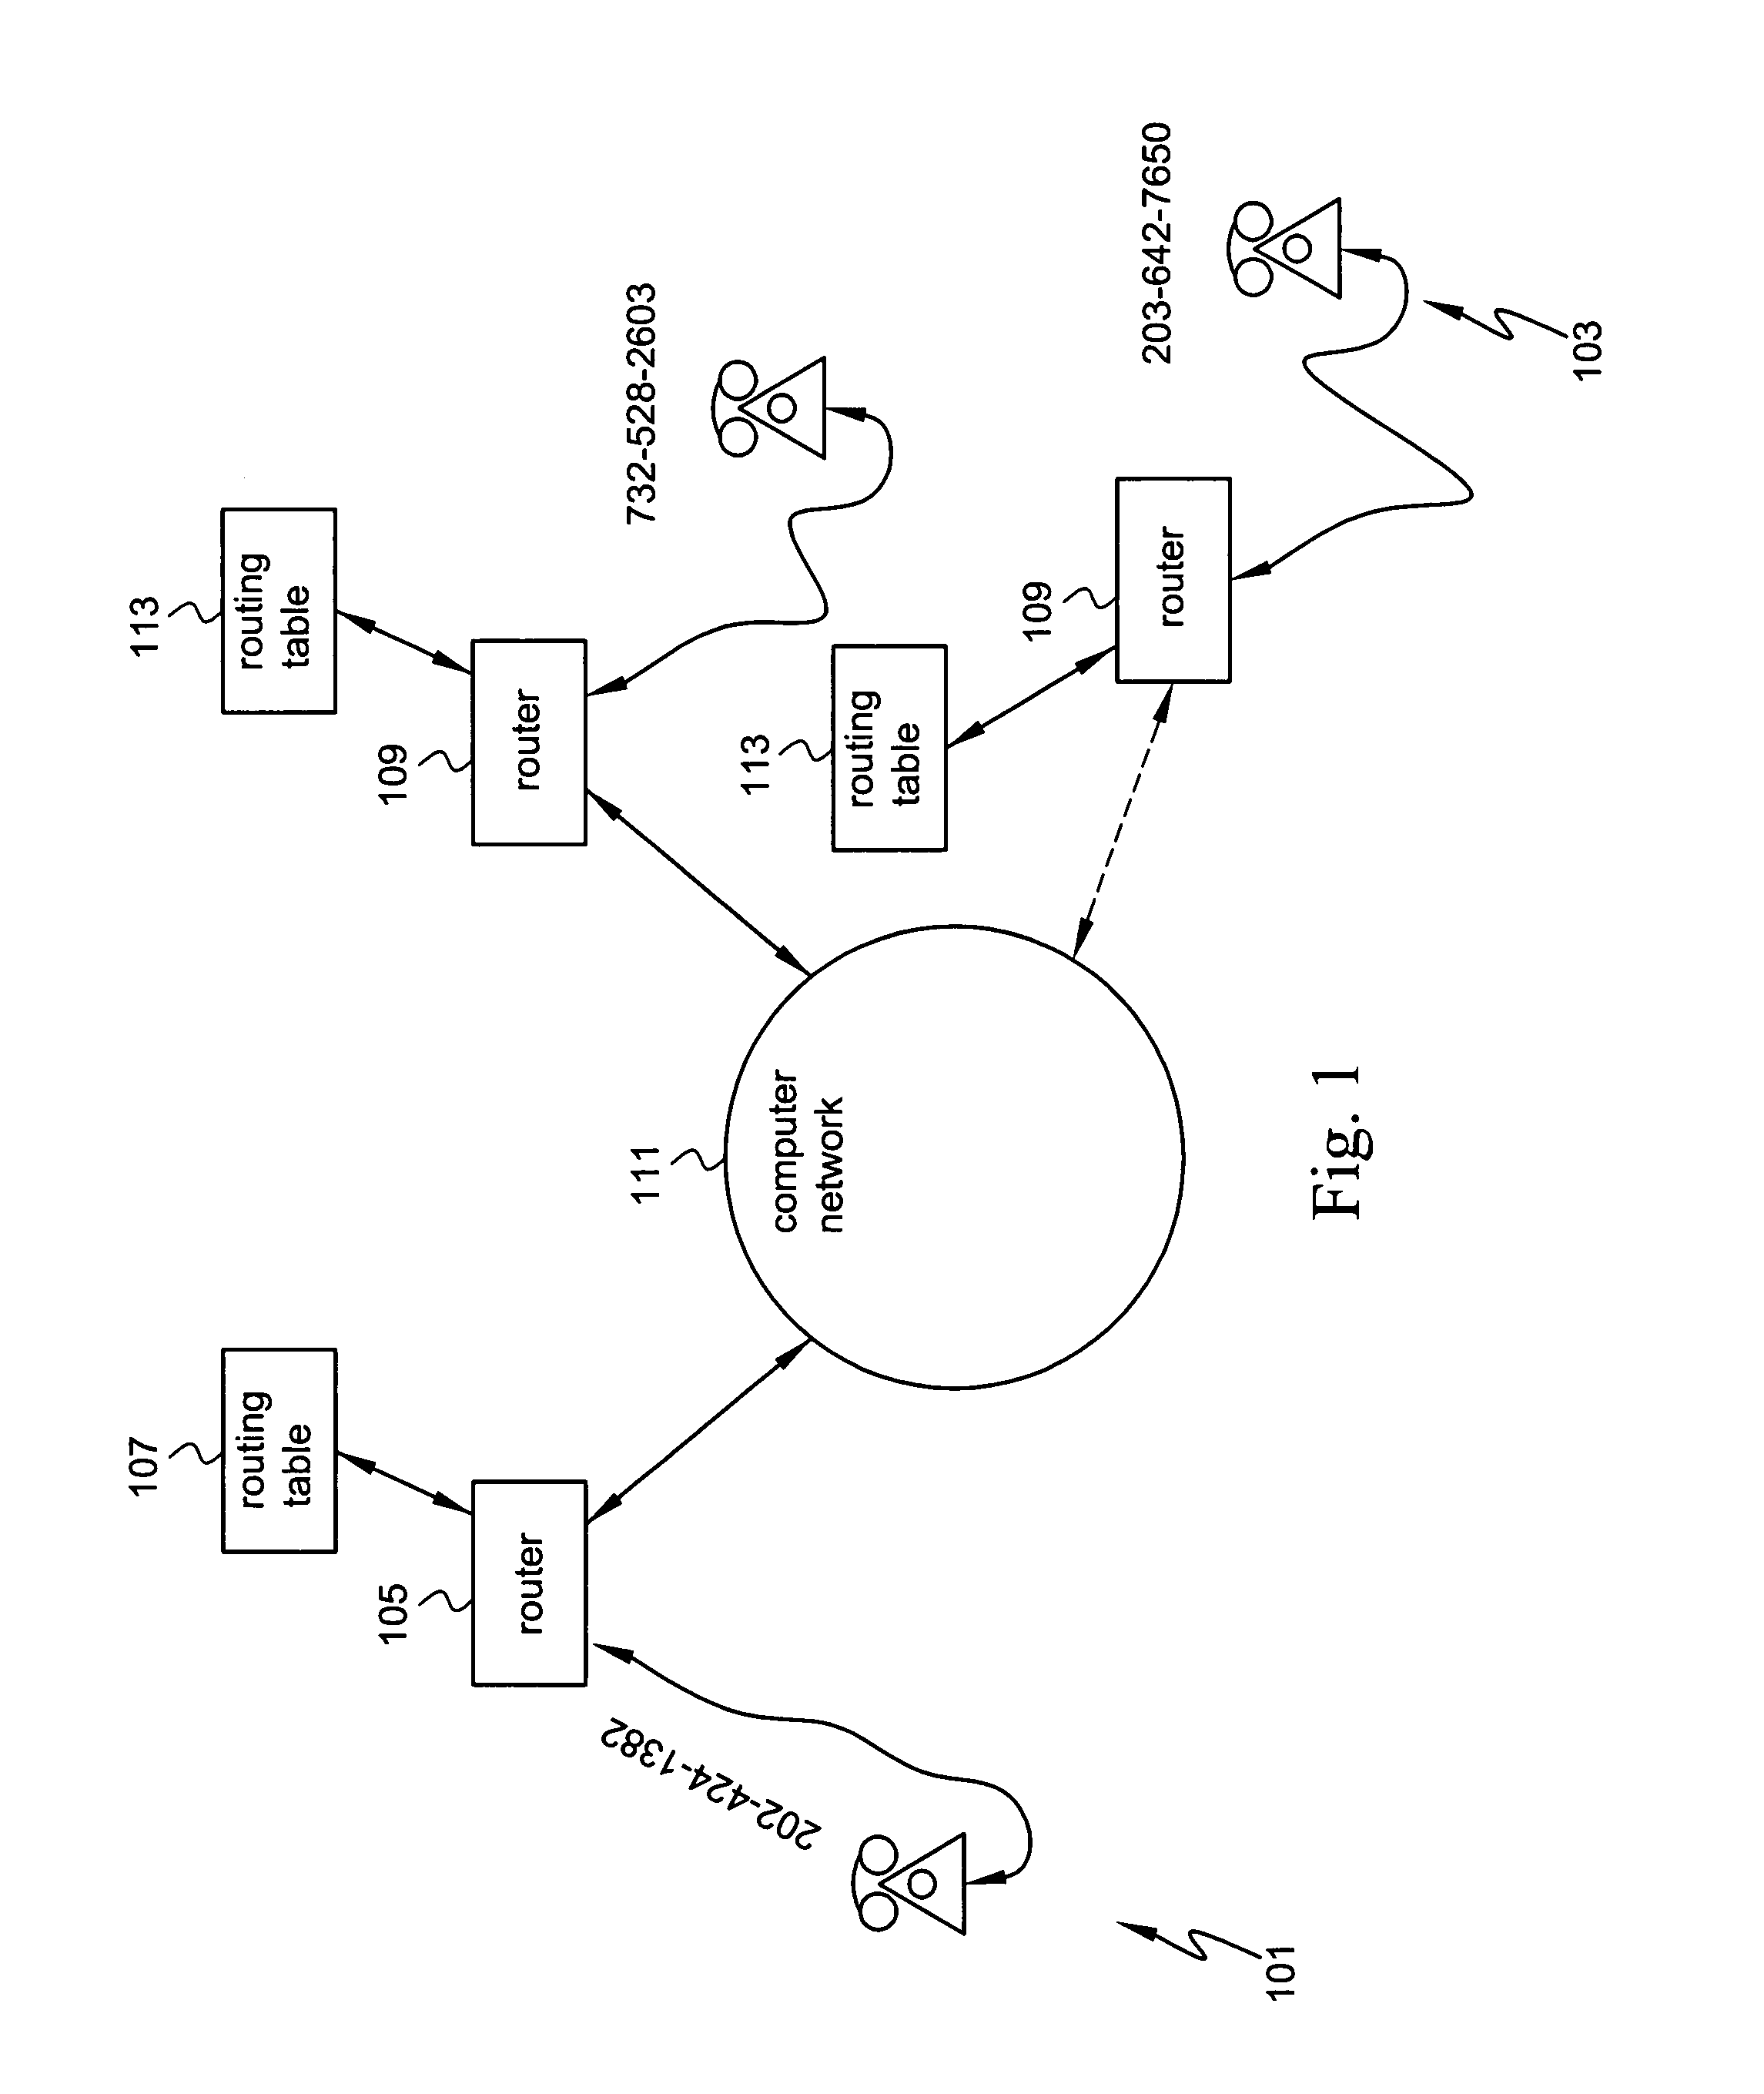 Method and apparatus for placing a long distance call based on a virtual phone number